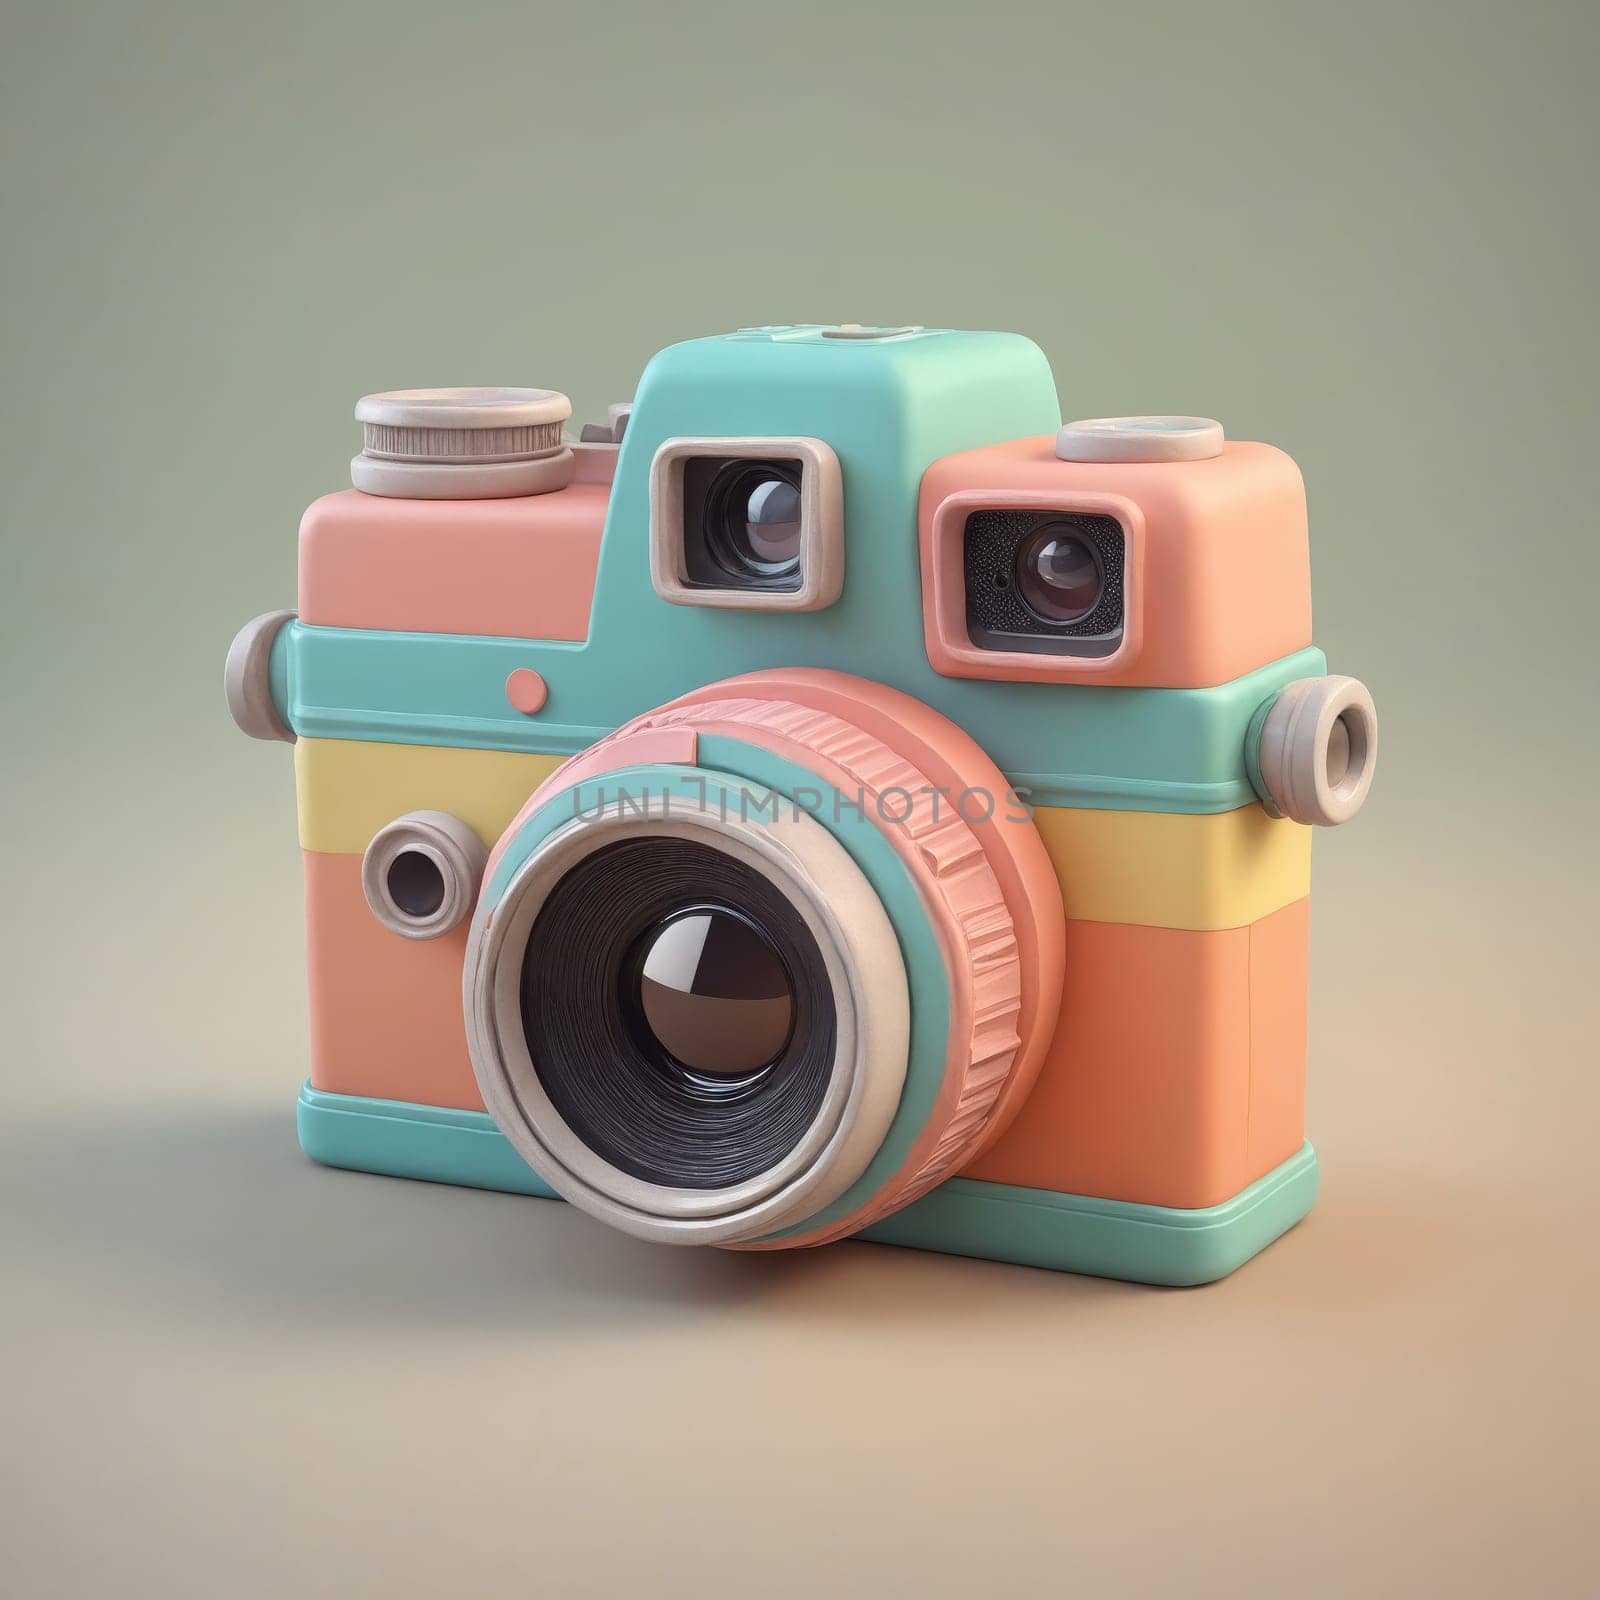 A colorful digital camera rests on a table, ready for action by Andre1ns